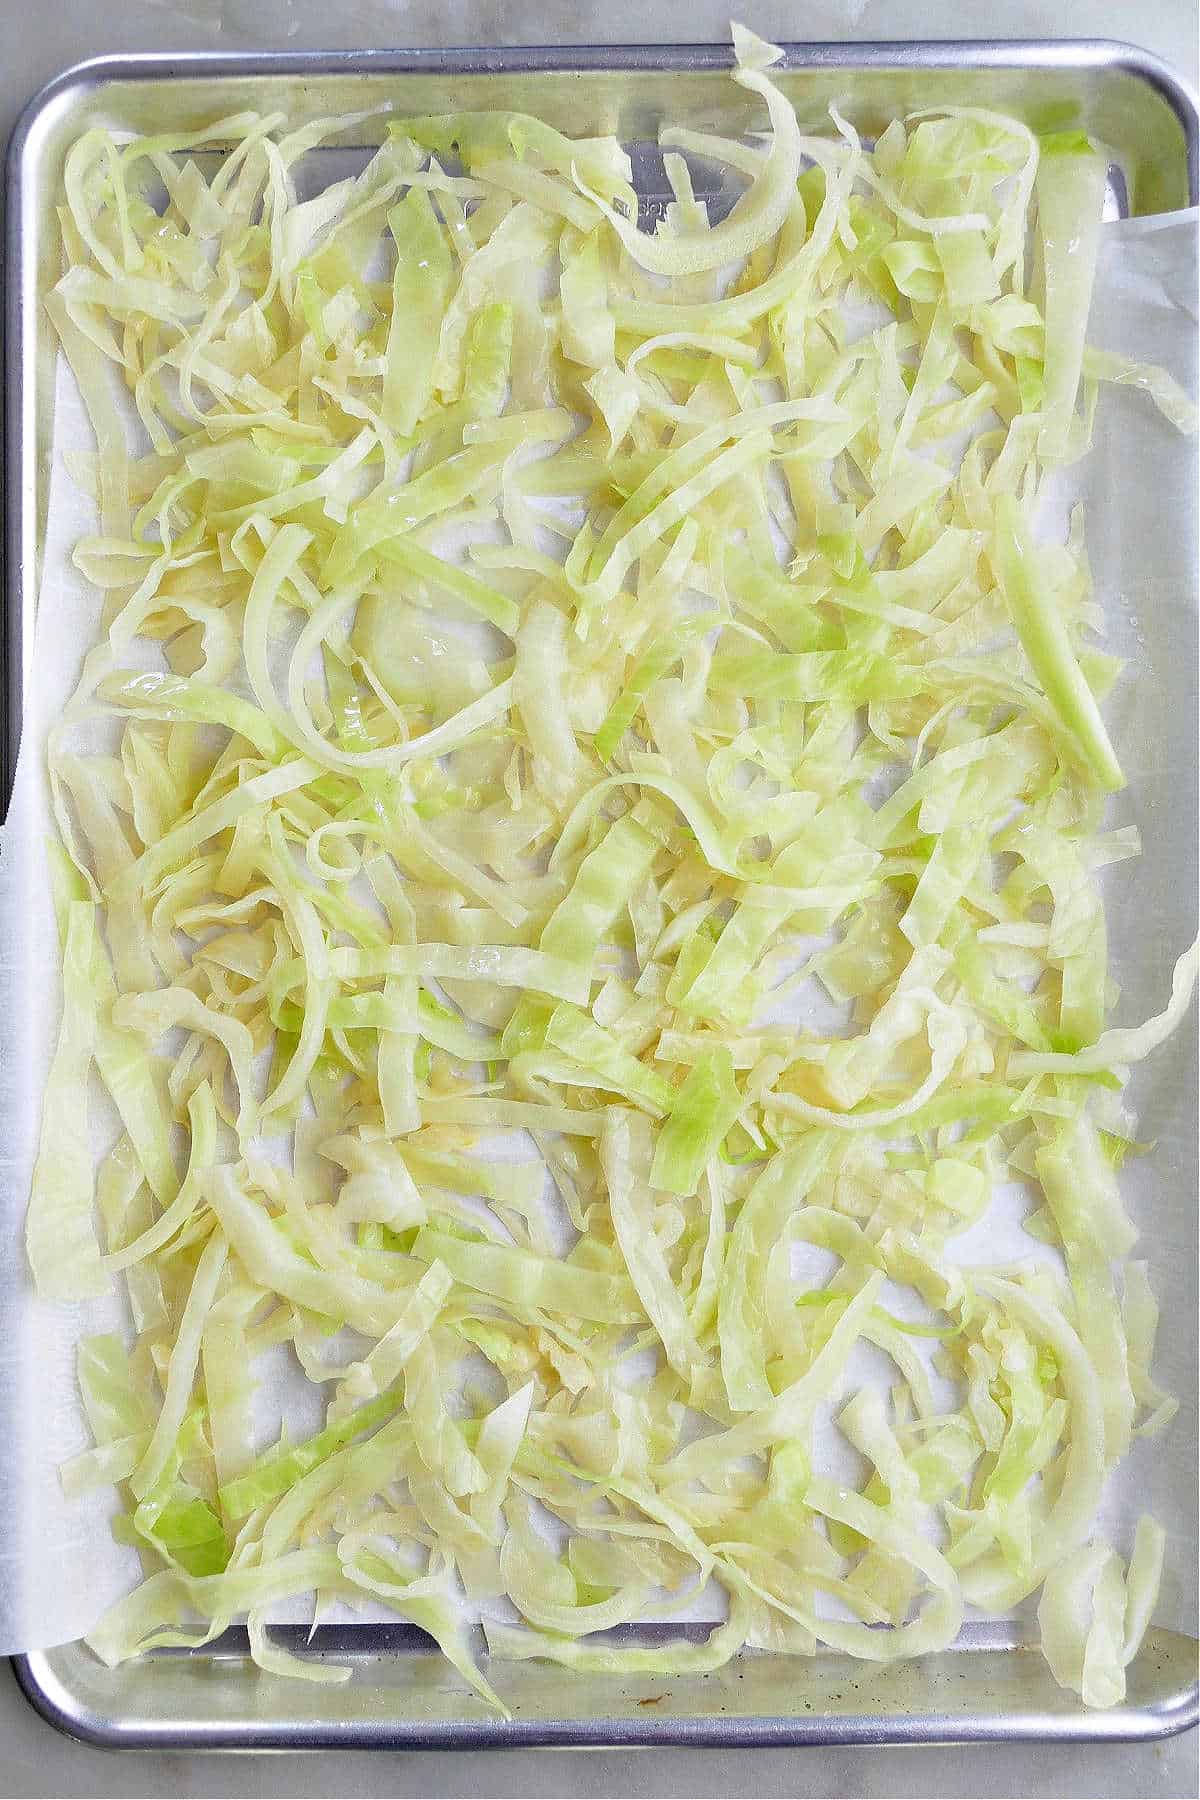 shredded and blanched cabbage spread out on a large baking sheet lined with parchment